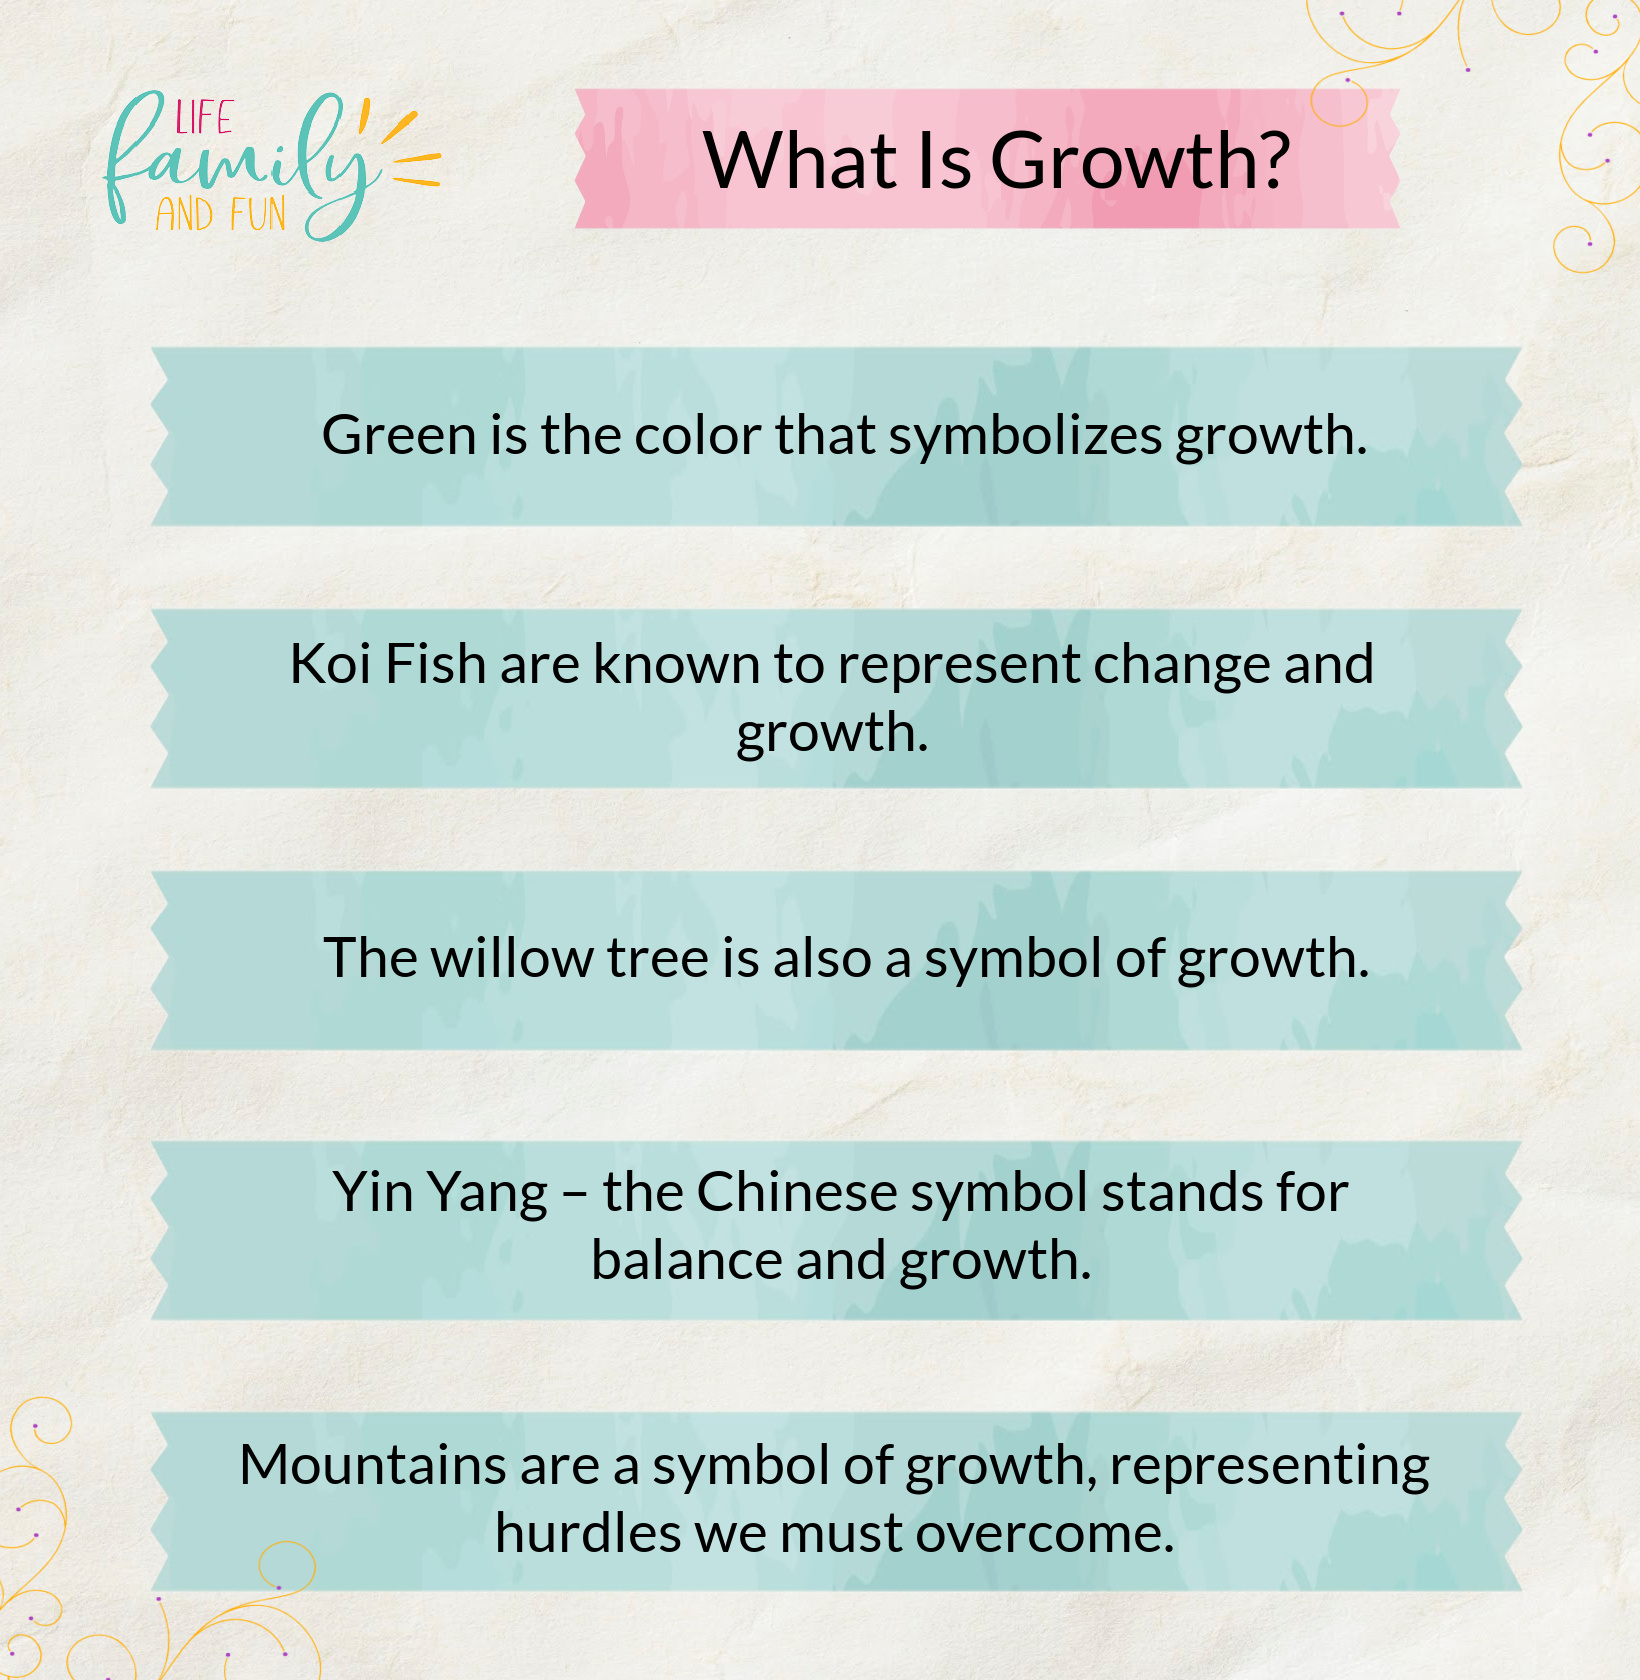 What Is Growth?